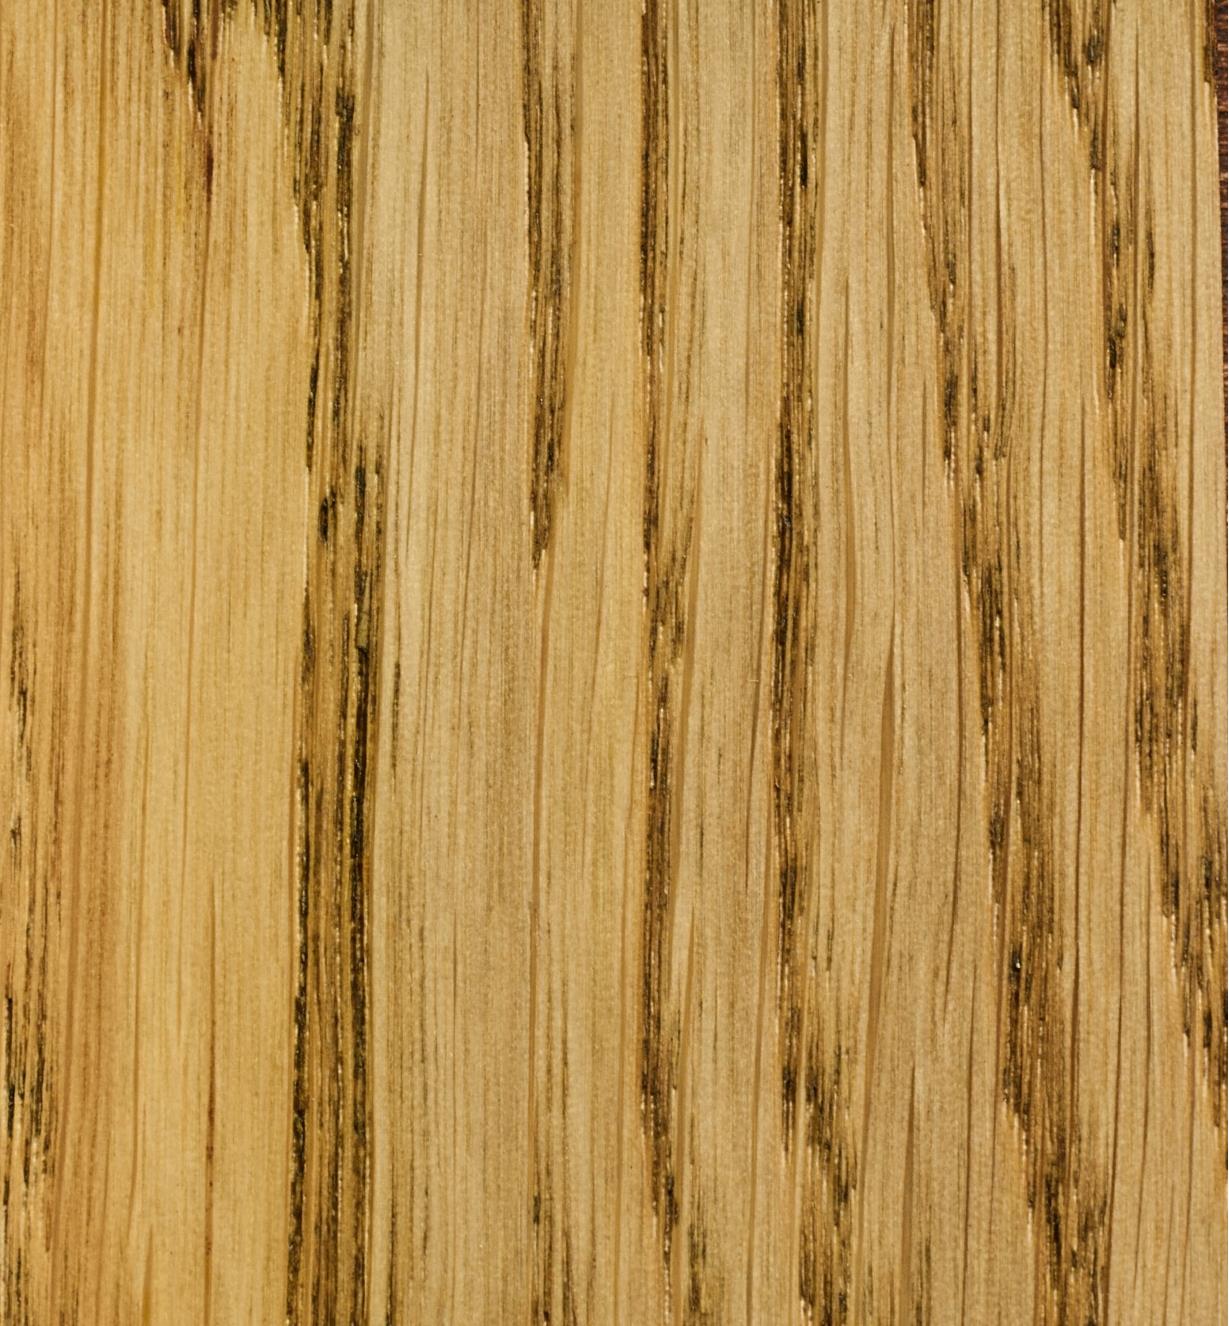 A swatch of Rubio Monocoat in the shade Walnut